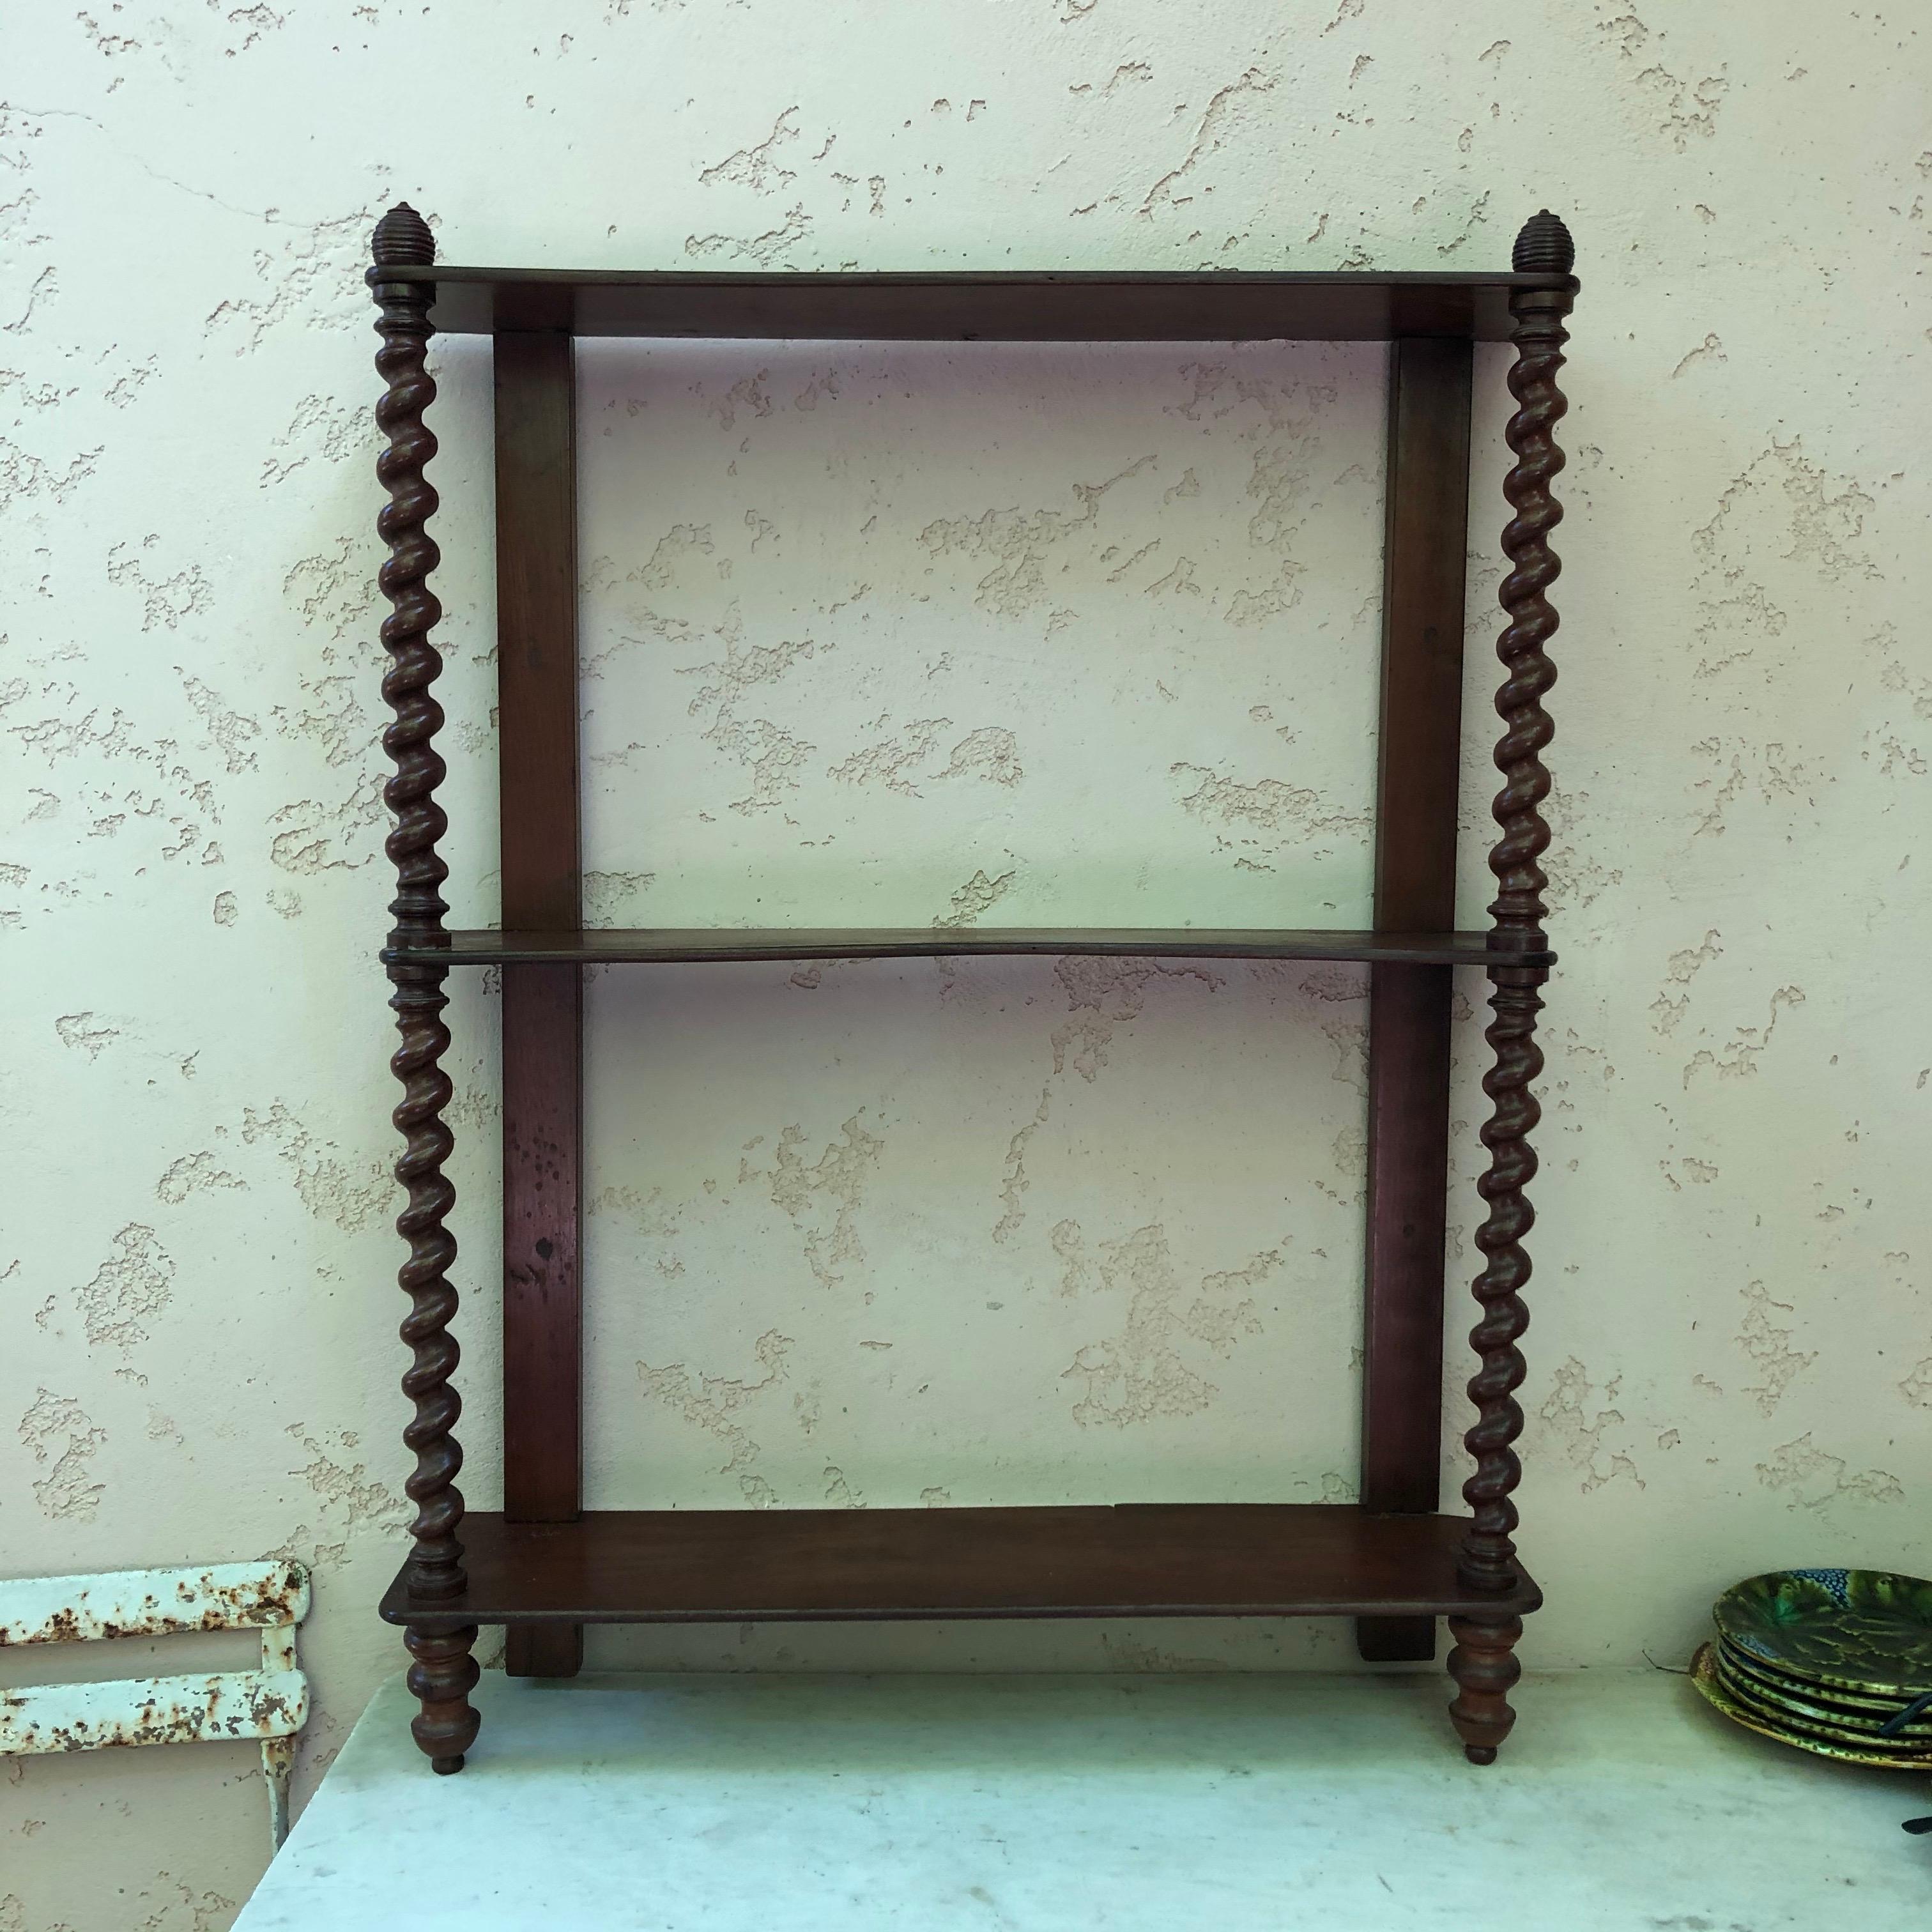 19th century French mahogany wood shelf with twisted column.
     